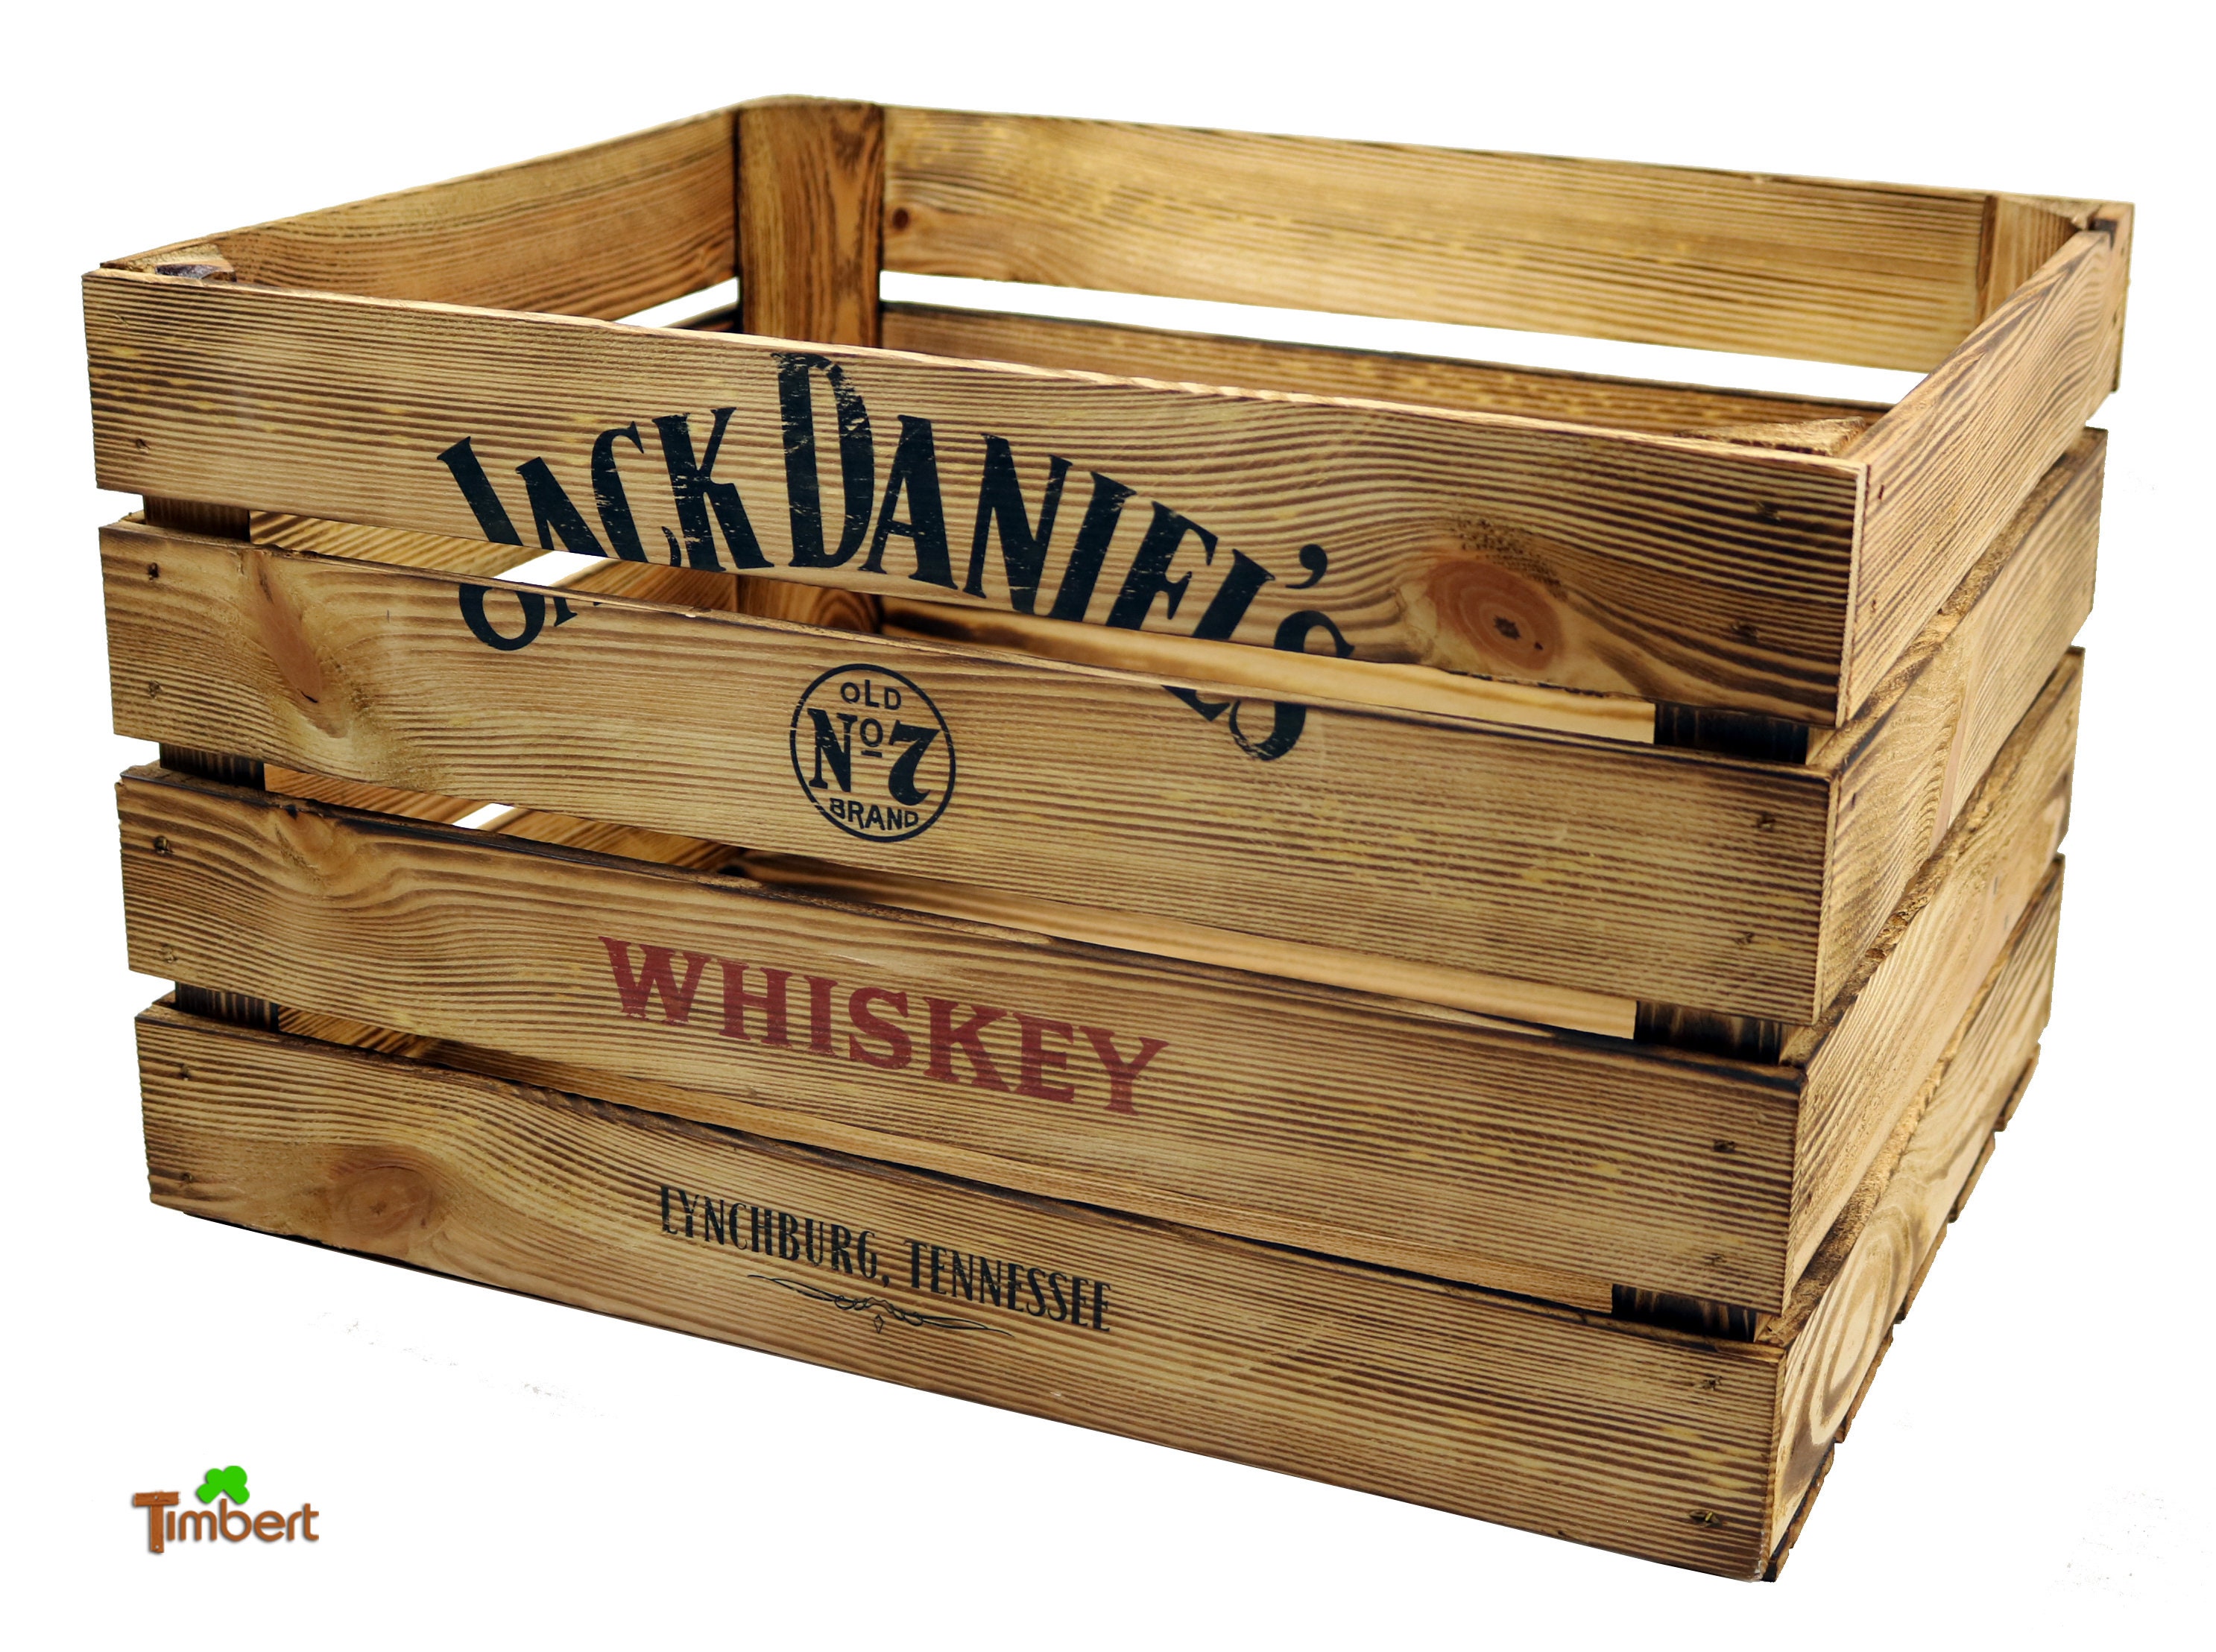 Rustic whiskey box wooden box with whiskey branding vintage gift box book  box drinks box bar gift basket men Father's Day decoration